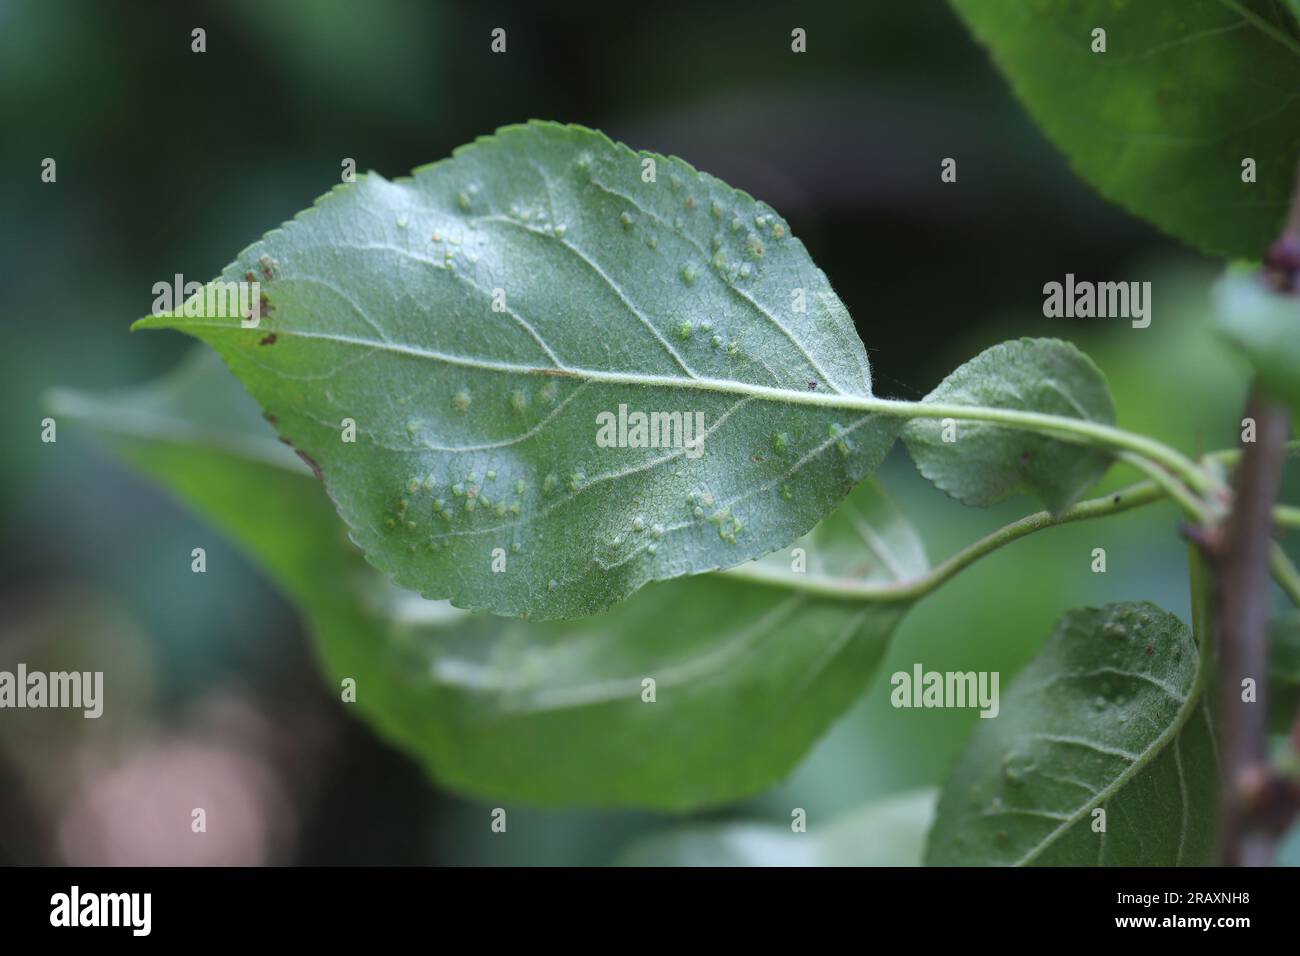 Galls, deformations on the leaf of apple trees caused by mites Eriophyoidea. Stock Photo